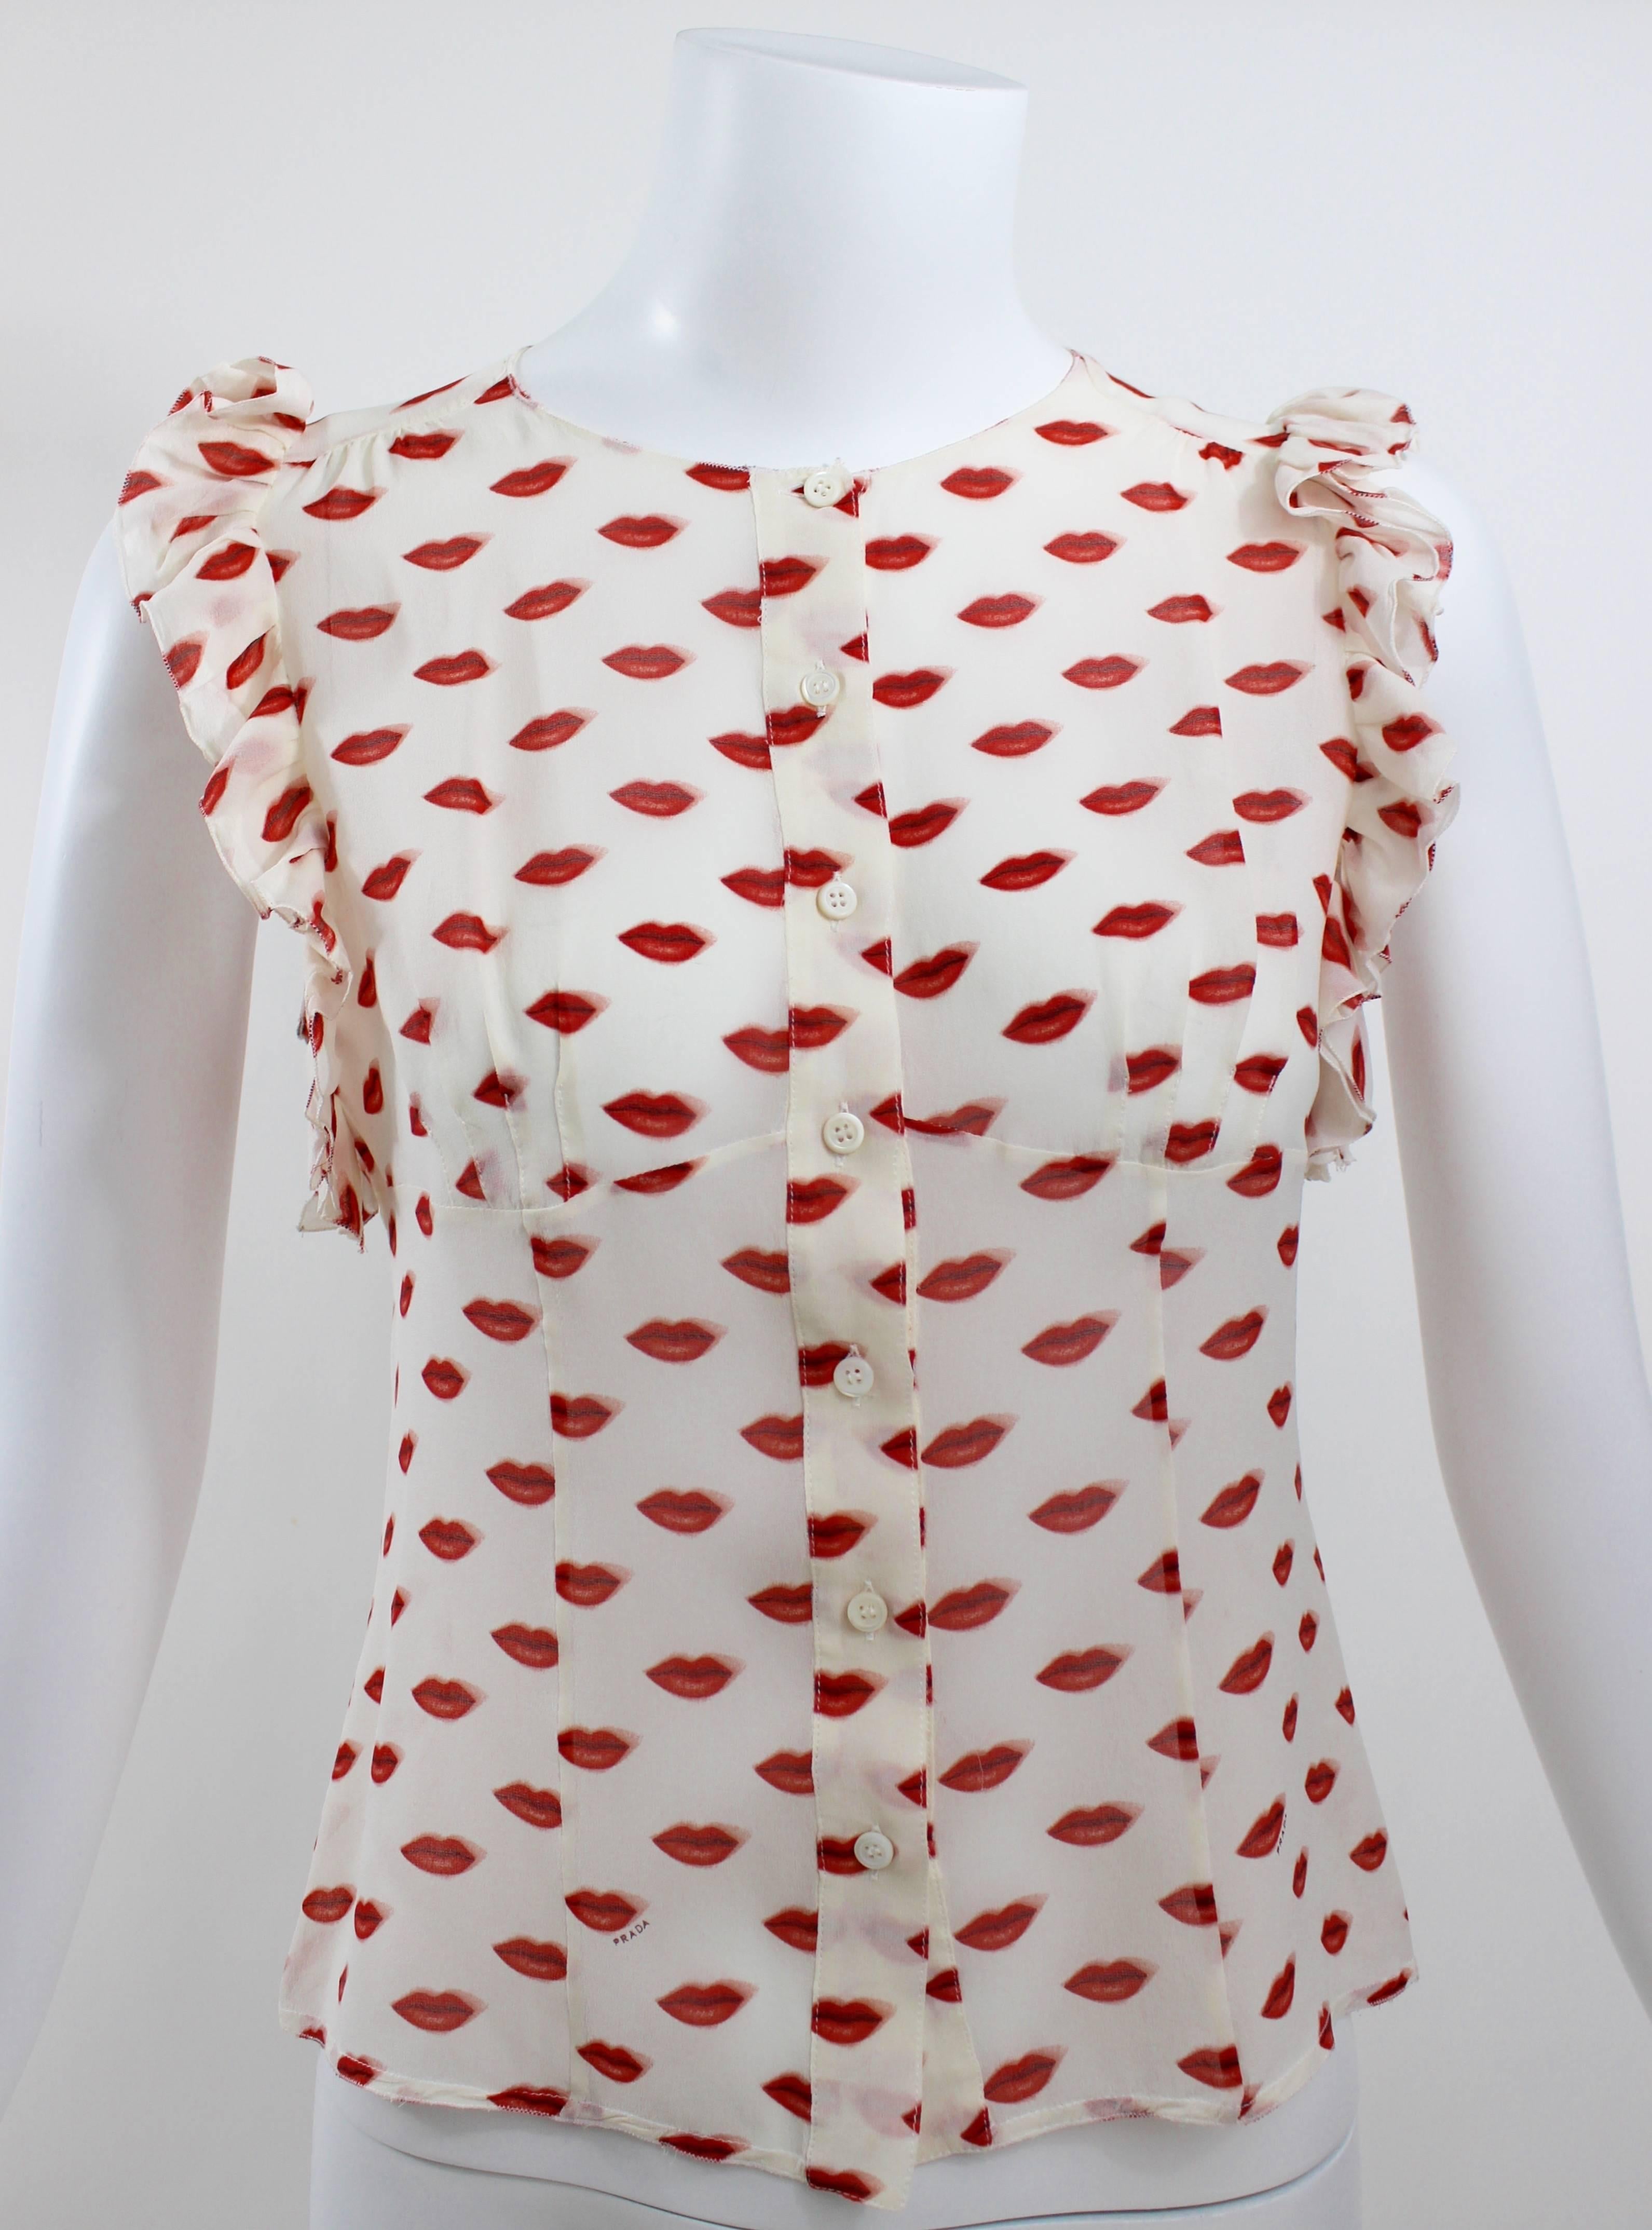 Iconic Prada lip print silk chiffon sleeveless blouse from 2012.
Excellent condition.
Size tag removed, please go according to measurements.
Photographed on a size 4 mannequin.

Measurements:
Bust: 34 inches
waist: 30 inches
length: 19.5